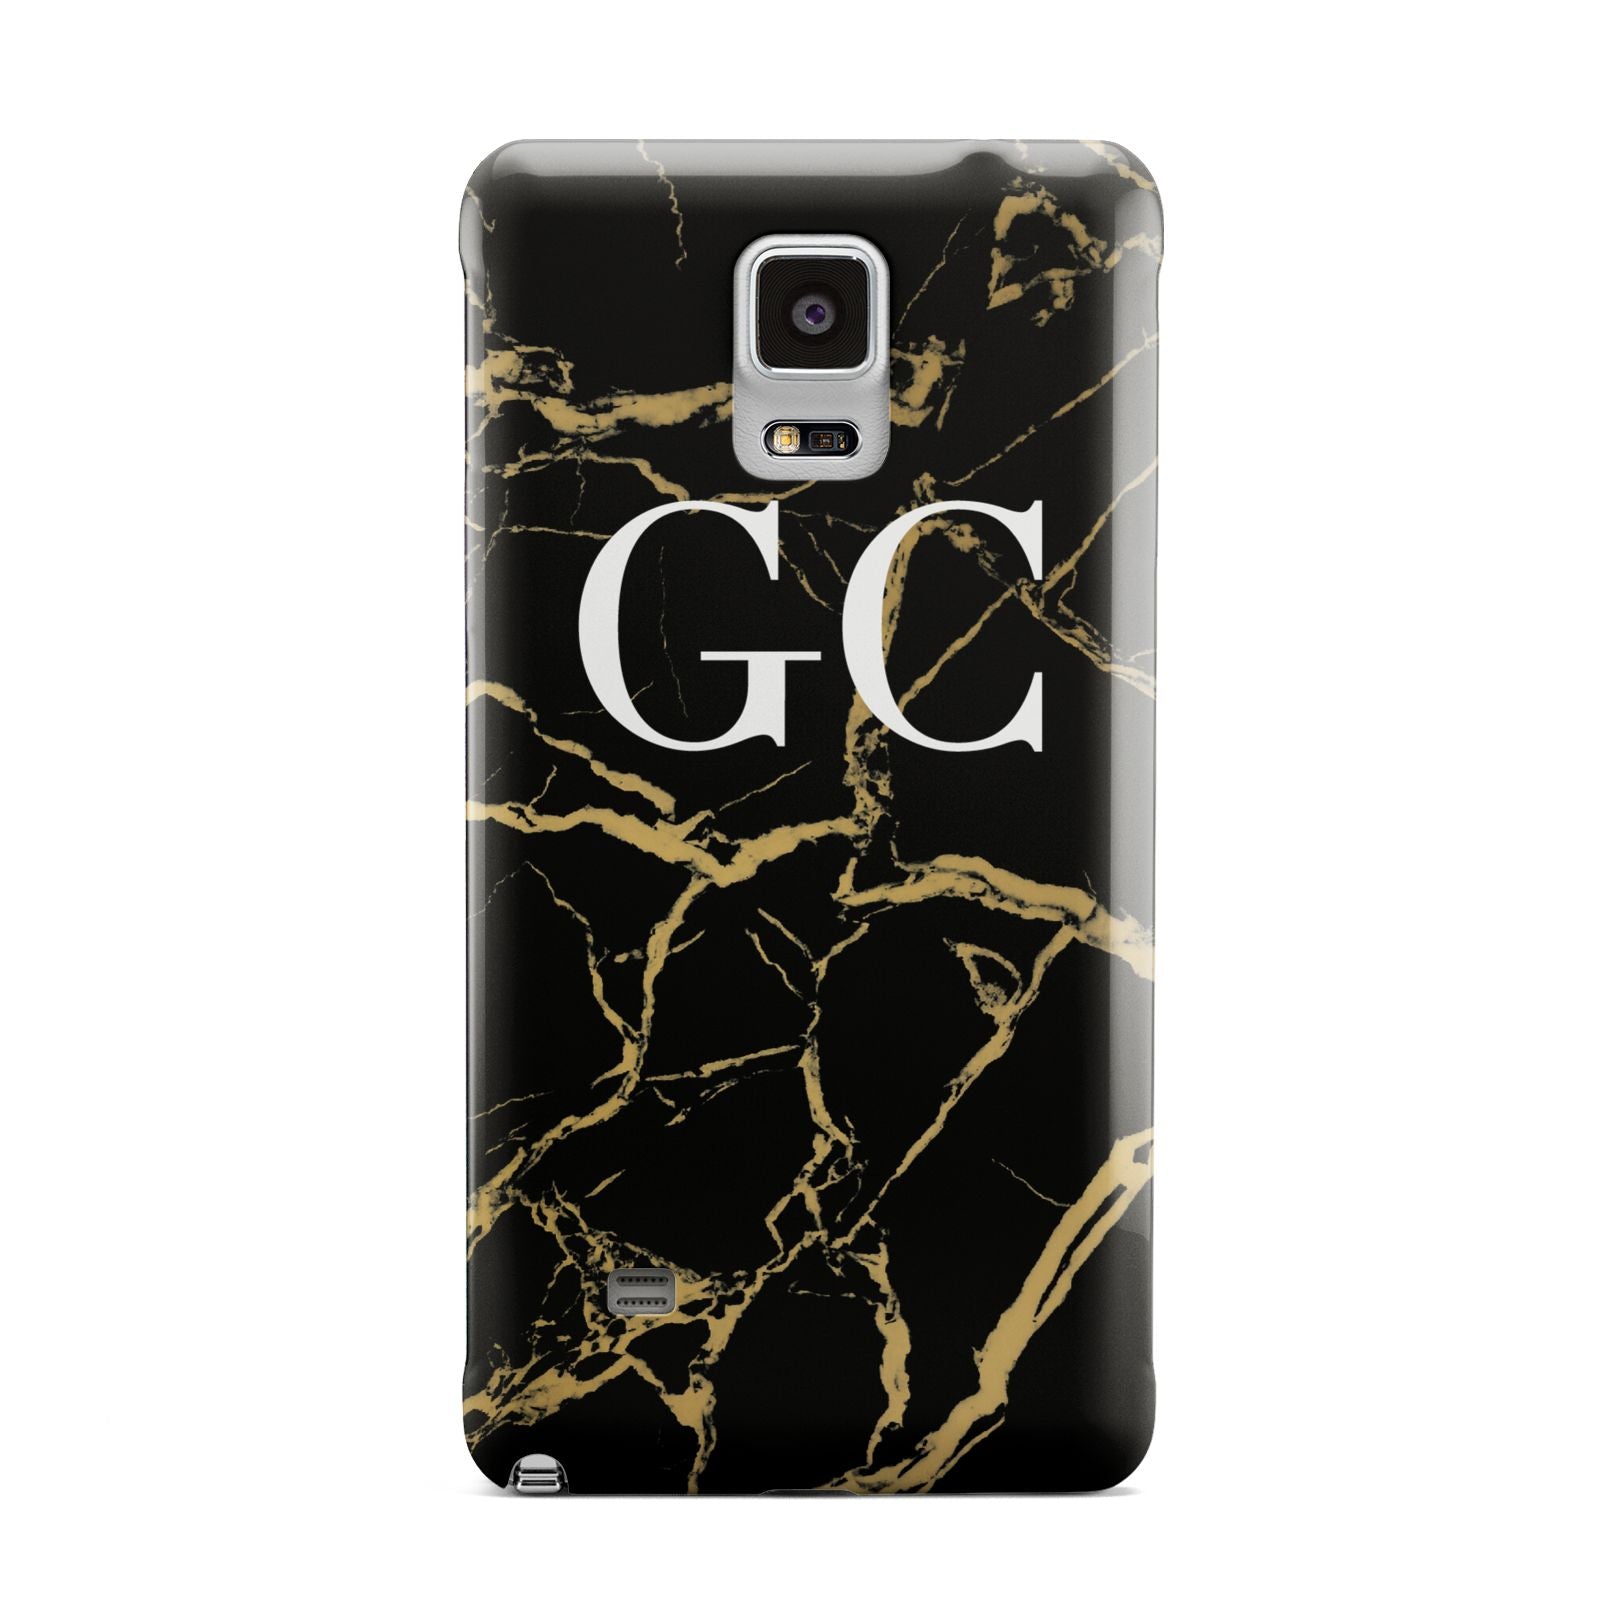 Personalised Gold Black Marble Monogram Samsung Galaxy Note 4 Case